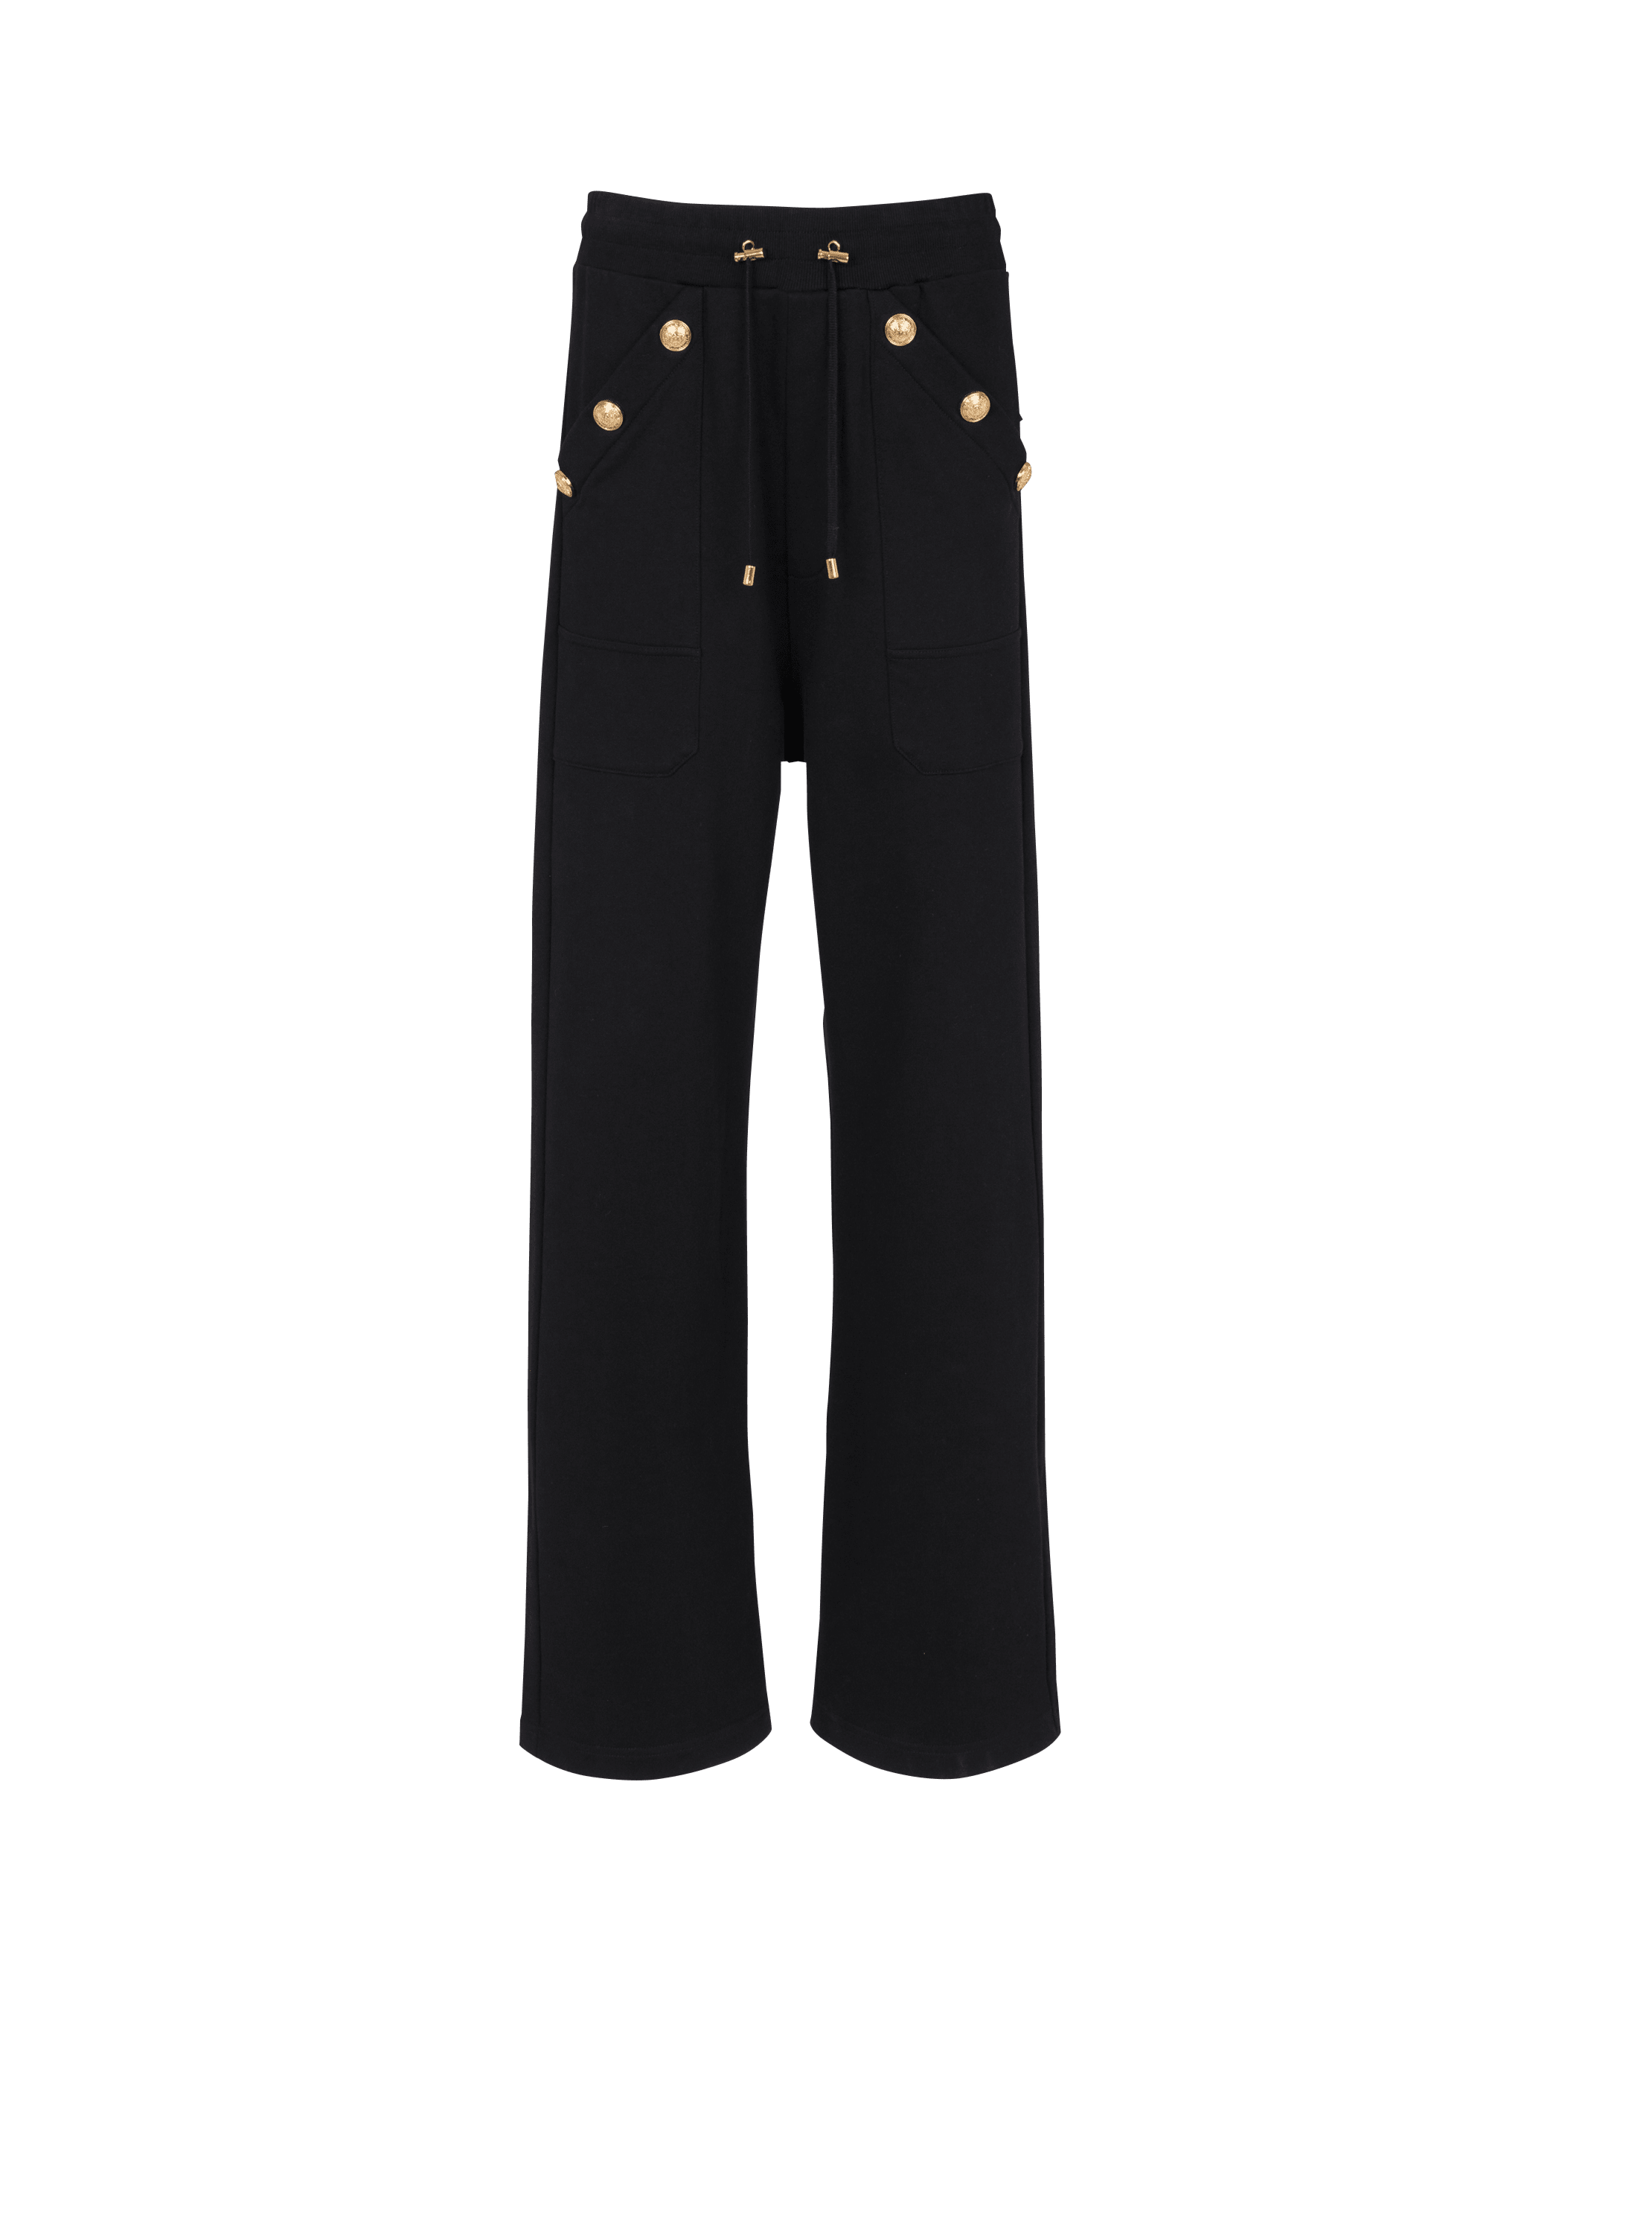 Loose-fitting jogging bottoms made from eco-responsible cotton